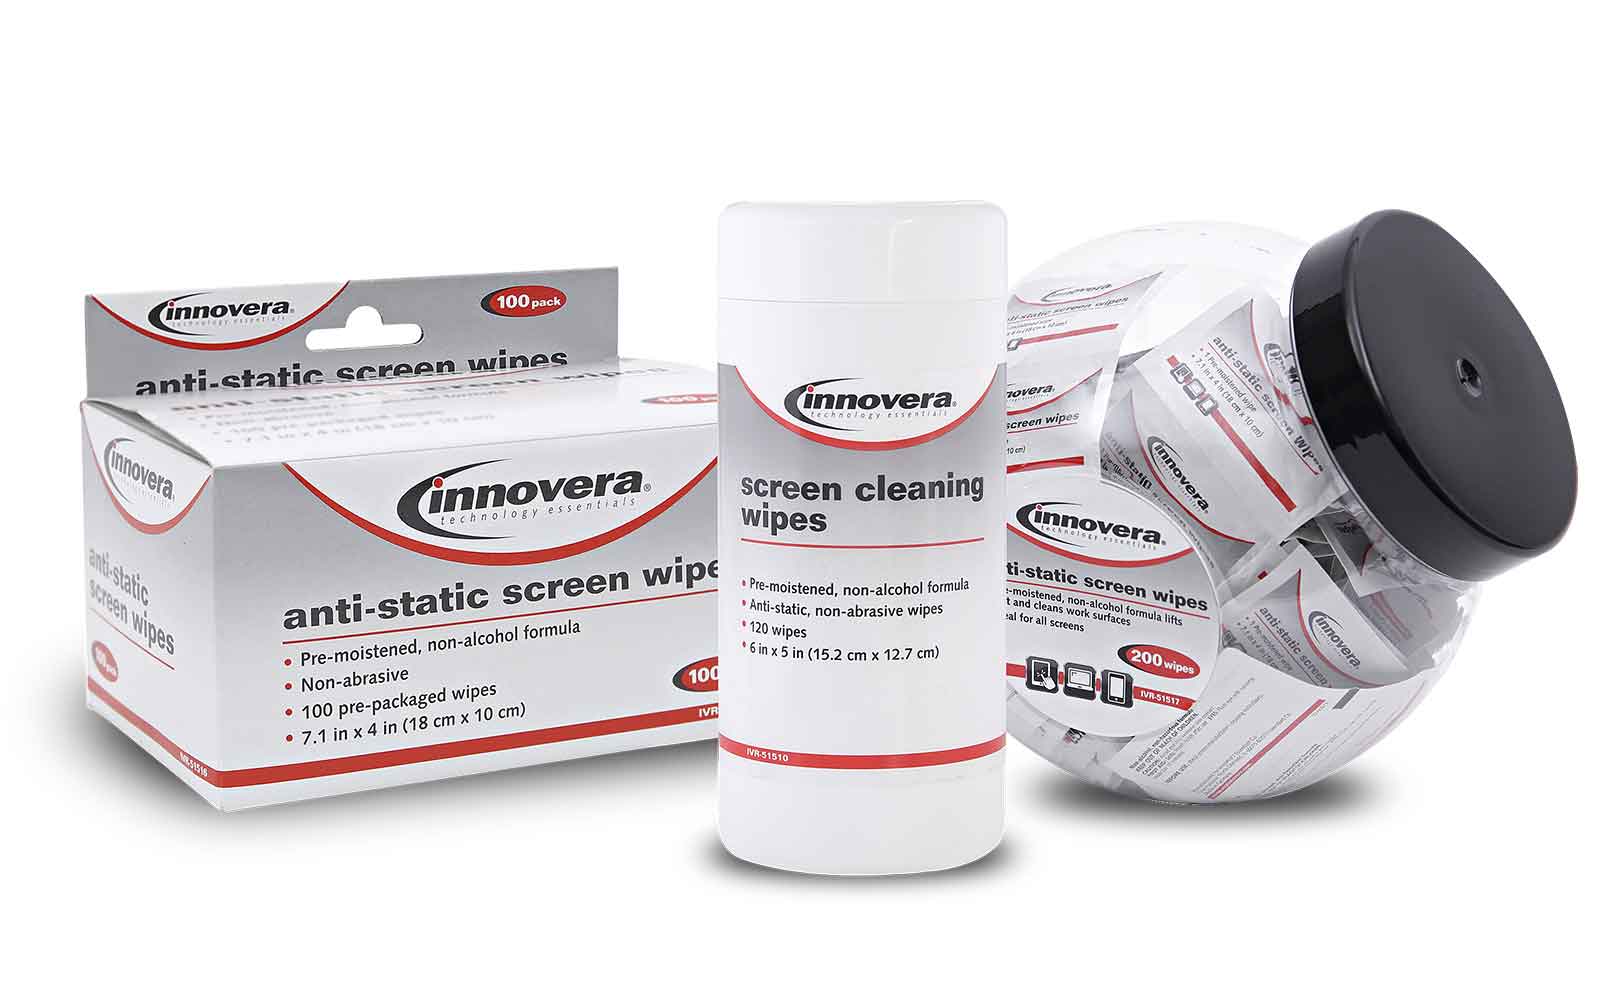 Innovera cleaning wipes family of products